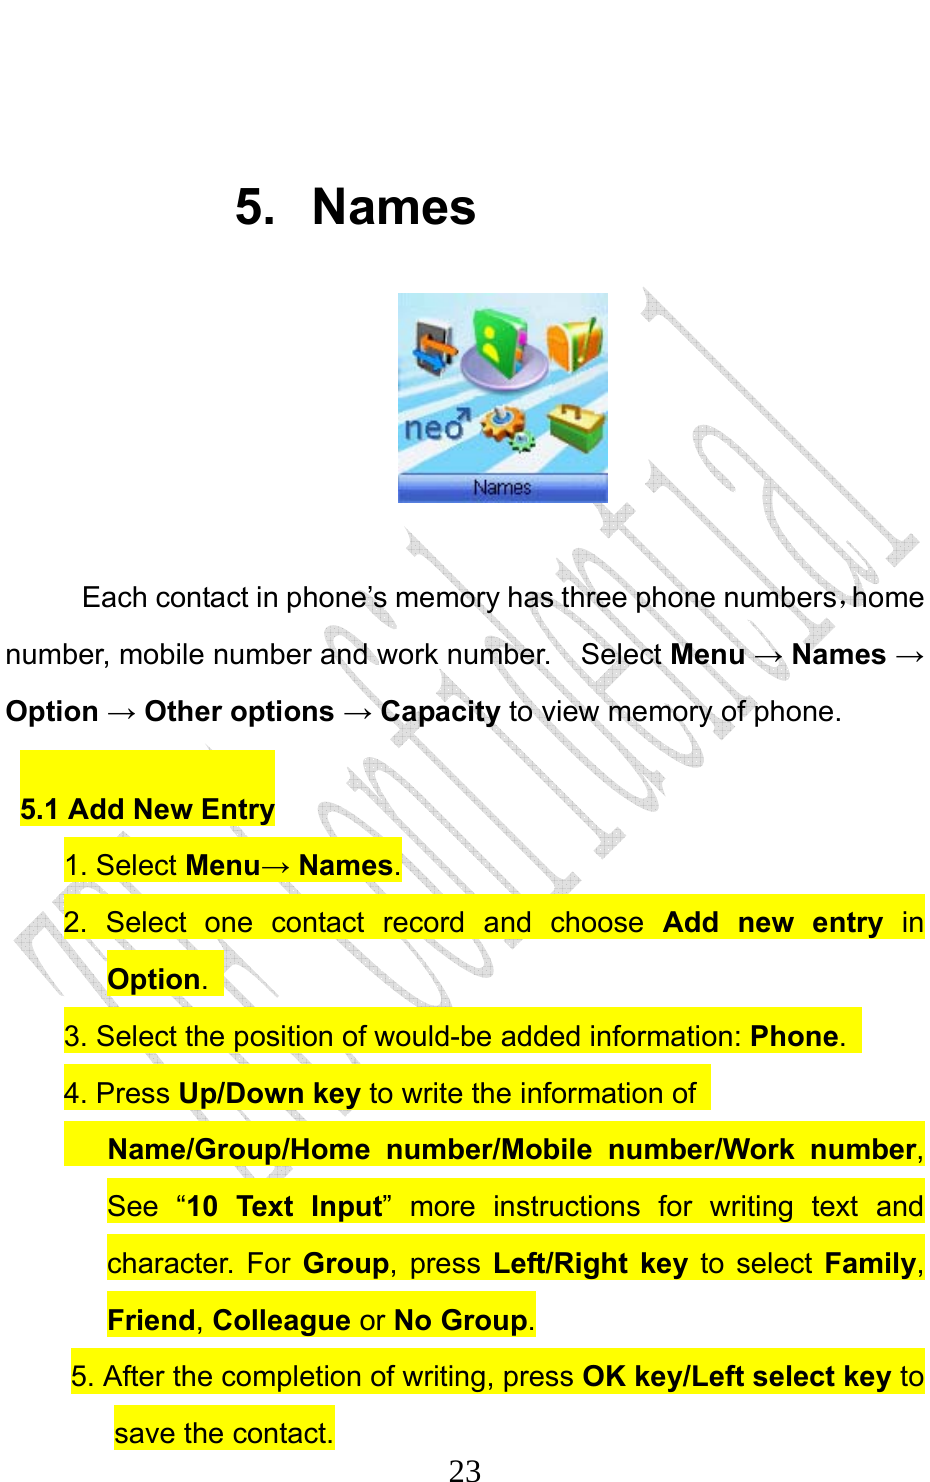                              23 5. Names   Each contact in phone’s memory has three phone numbers，home number, mobile number and work number.    Select Menu → Names → Option → Other options → Capacity to view memory of phone. 5.1 Add New Entry 1. Select Menu→ Names. 2. Select one contact record and choose Add new entry in Option.  3. Select the position of would-be added information: Phone.  4. Press Up/Down key to write the information of      Name/Group/Home number/Mobile number/Work number, See “10 Text Input” more instructions for writing text and character. For Group, press Left/Right key to select Family, Friend, Colleague or No Group. 5. After the completion of writing, press OK key/Left select key to save the contact. 